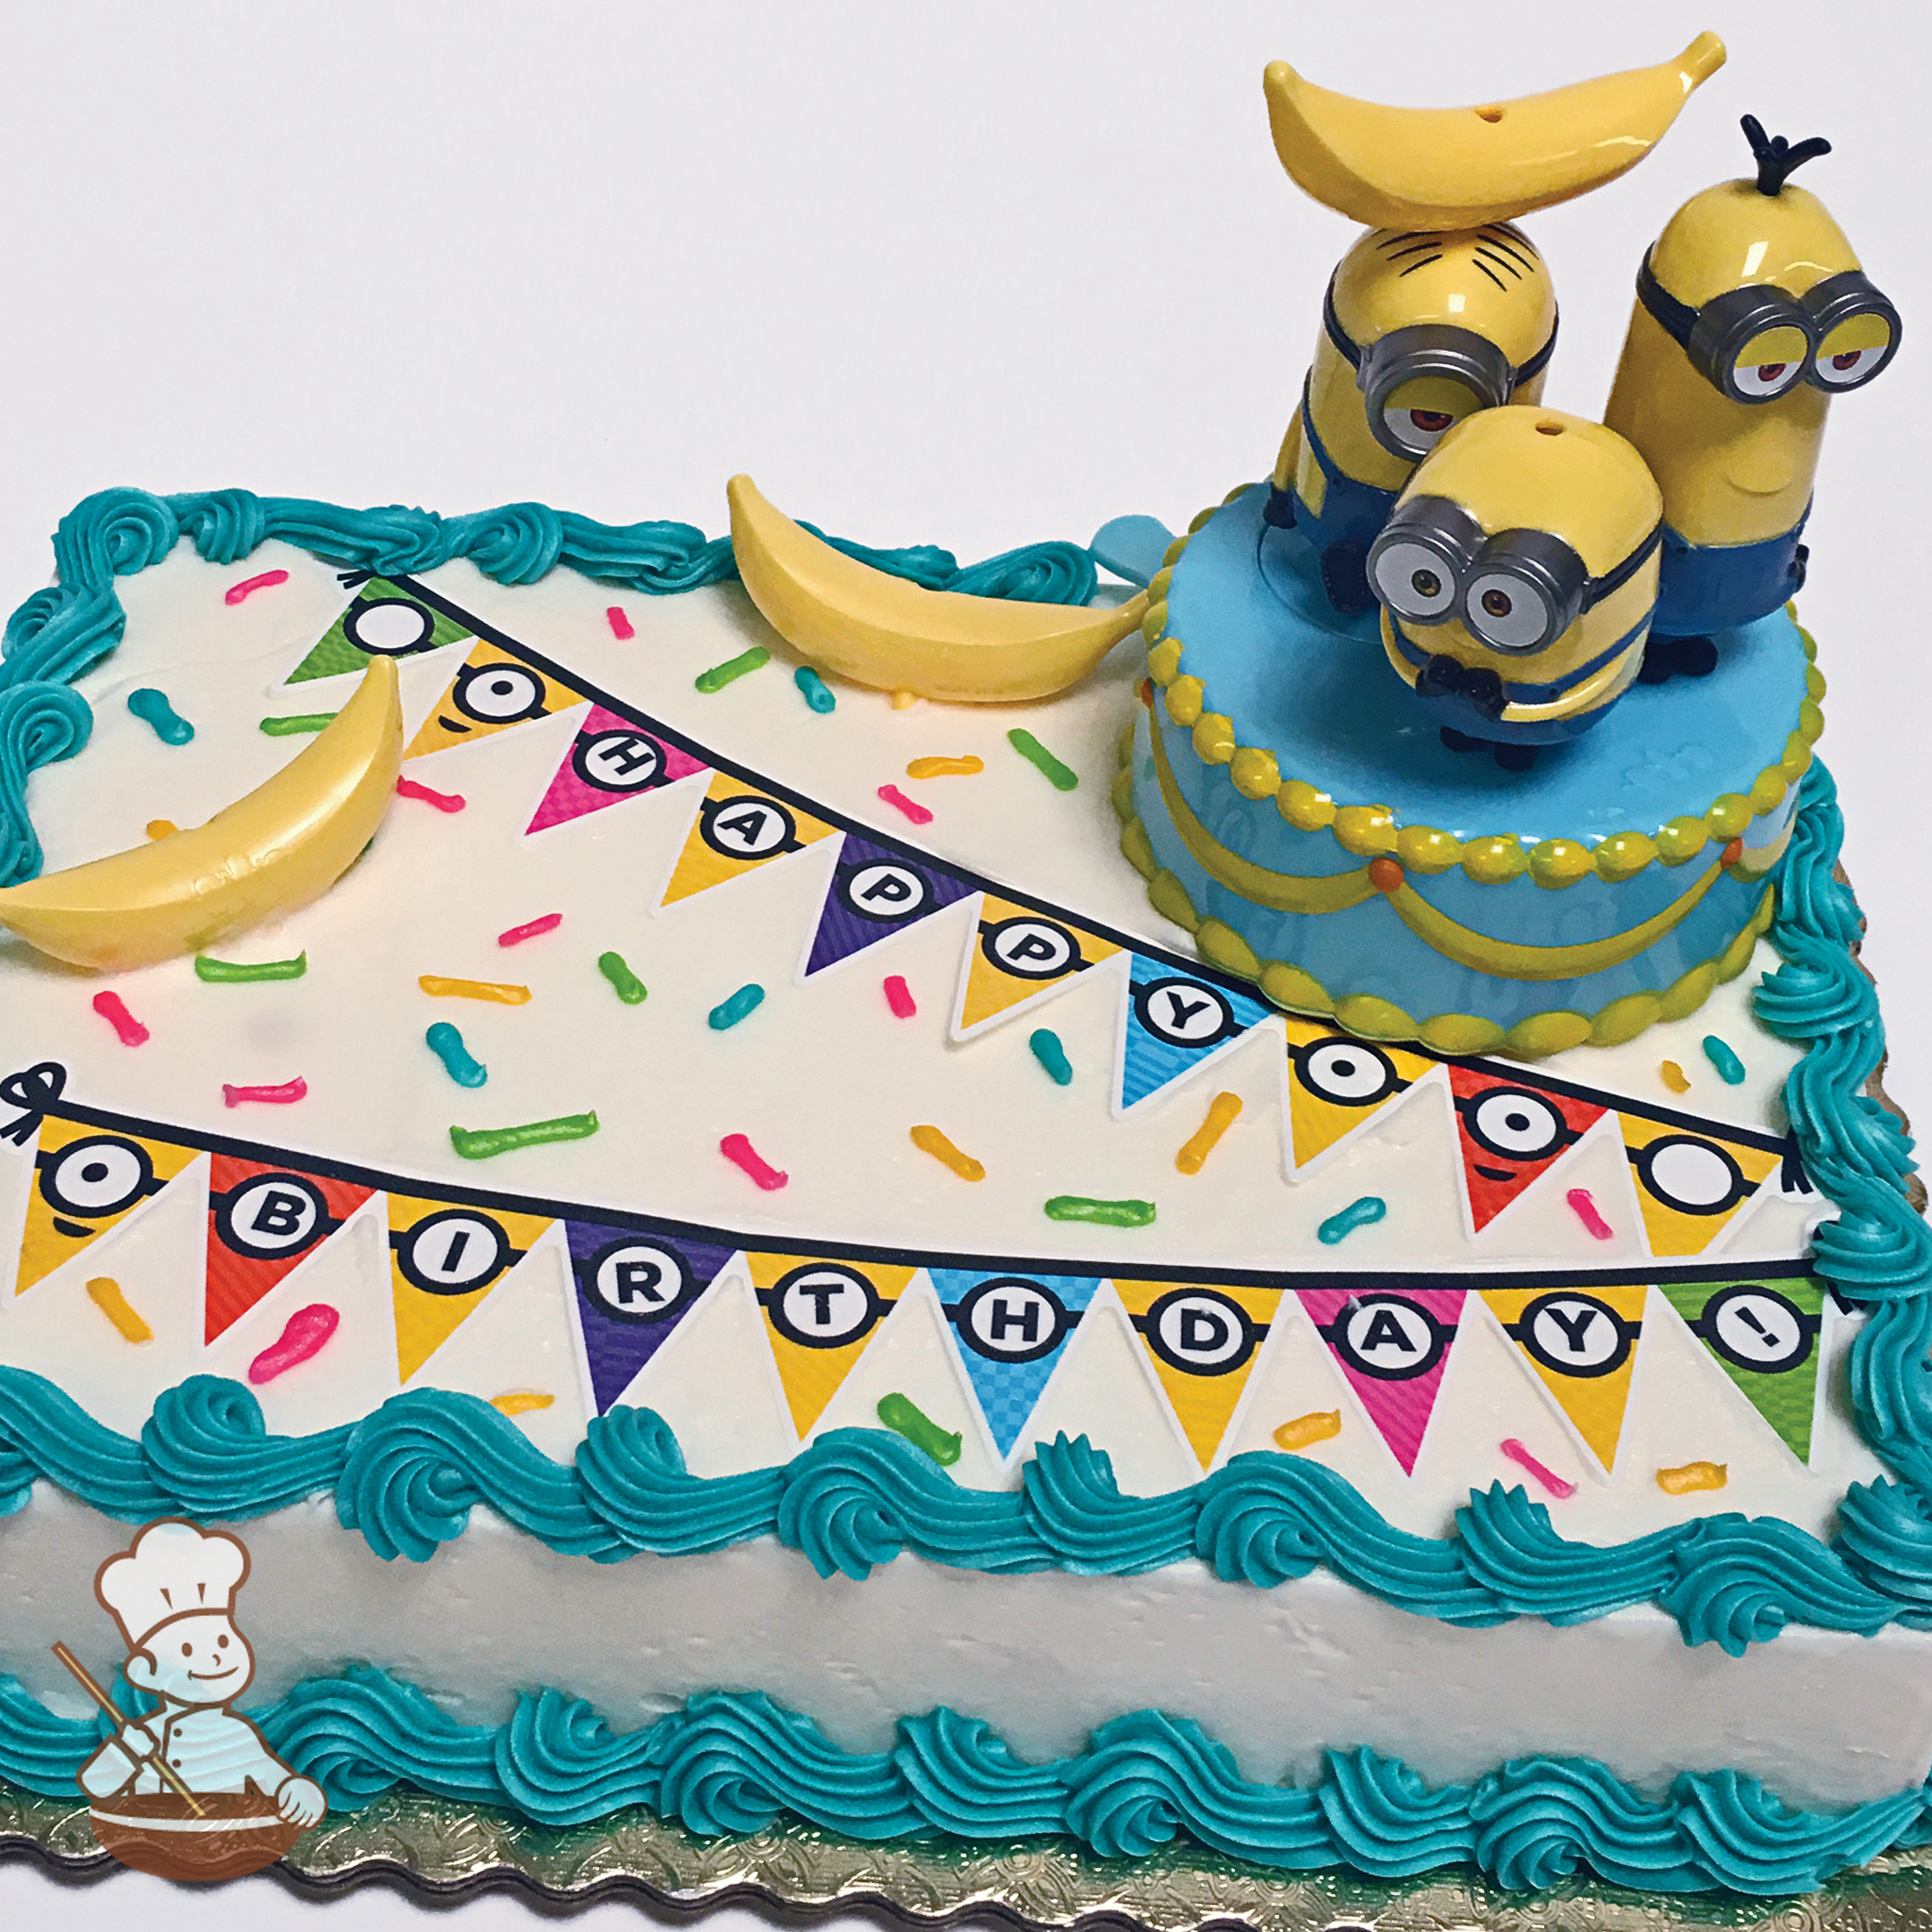 Buy The Minions Cake| Online Cake Delivery - CakeBee